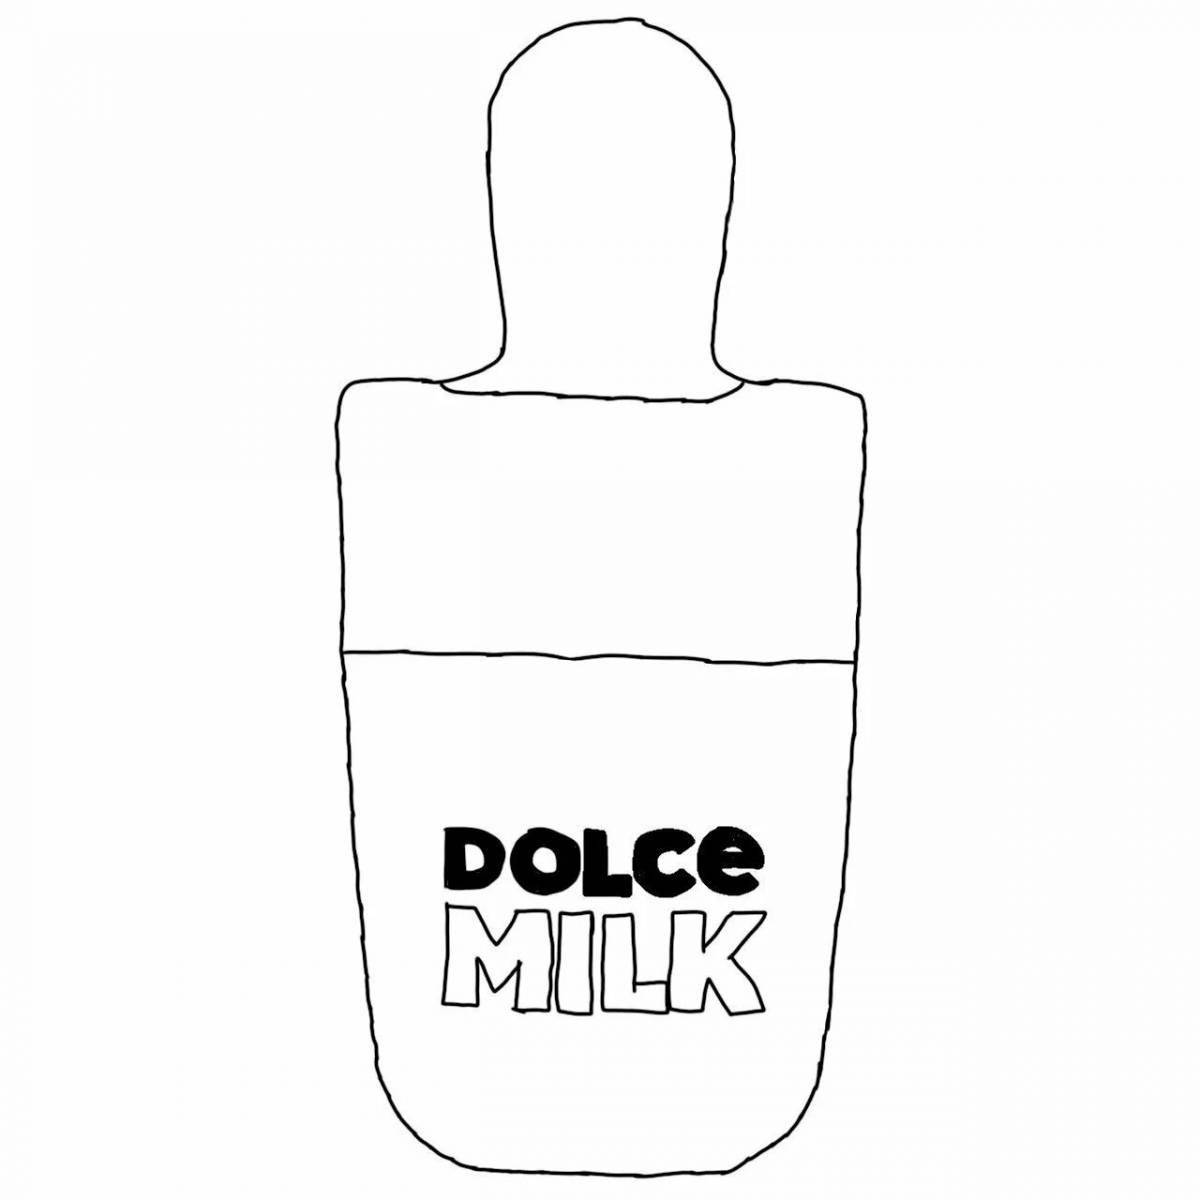 Dolce milk shampoo wonderful coloring page